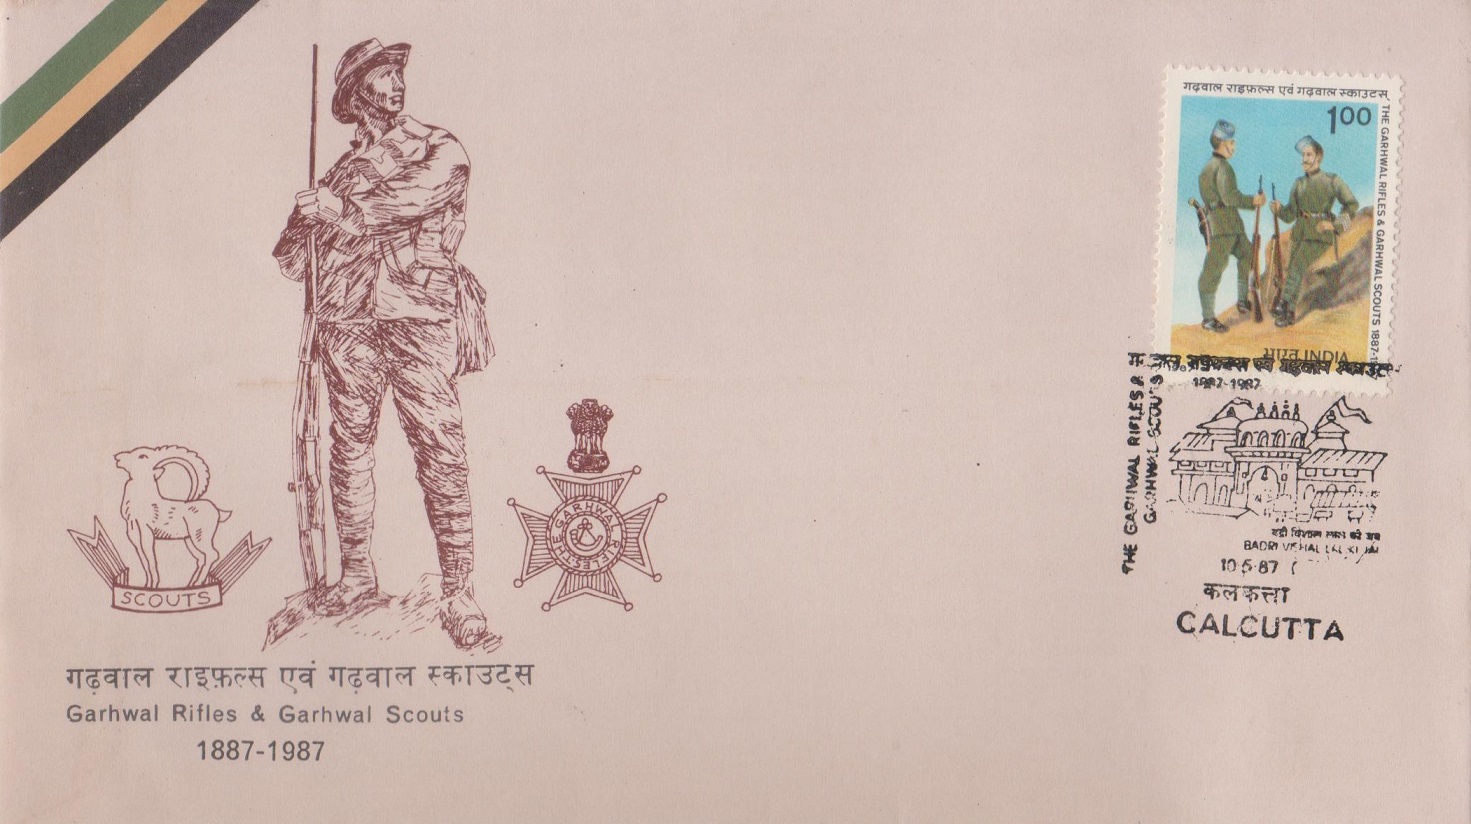  The Garhwal Rifles and the Garhwal Scouts